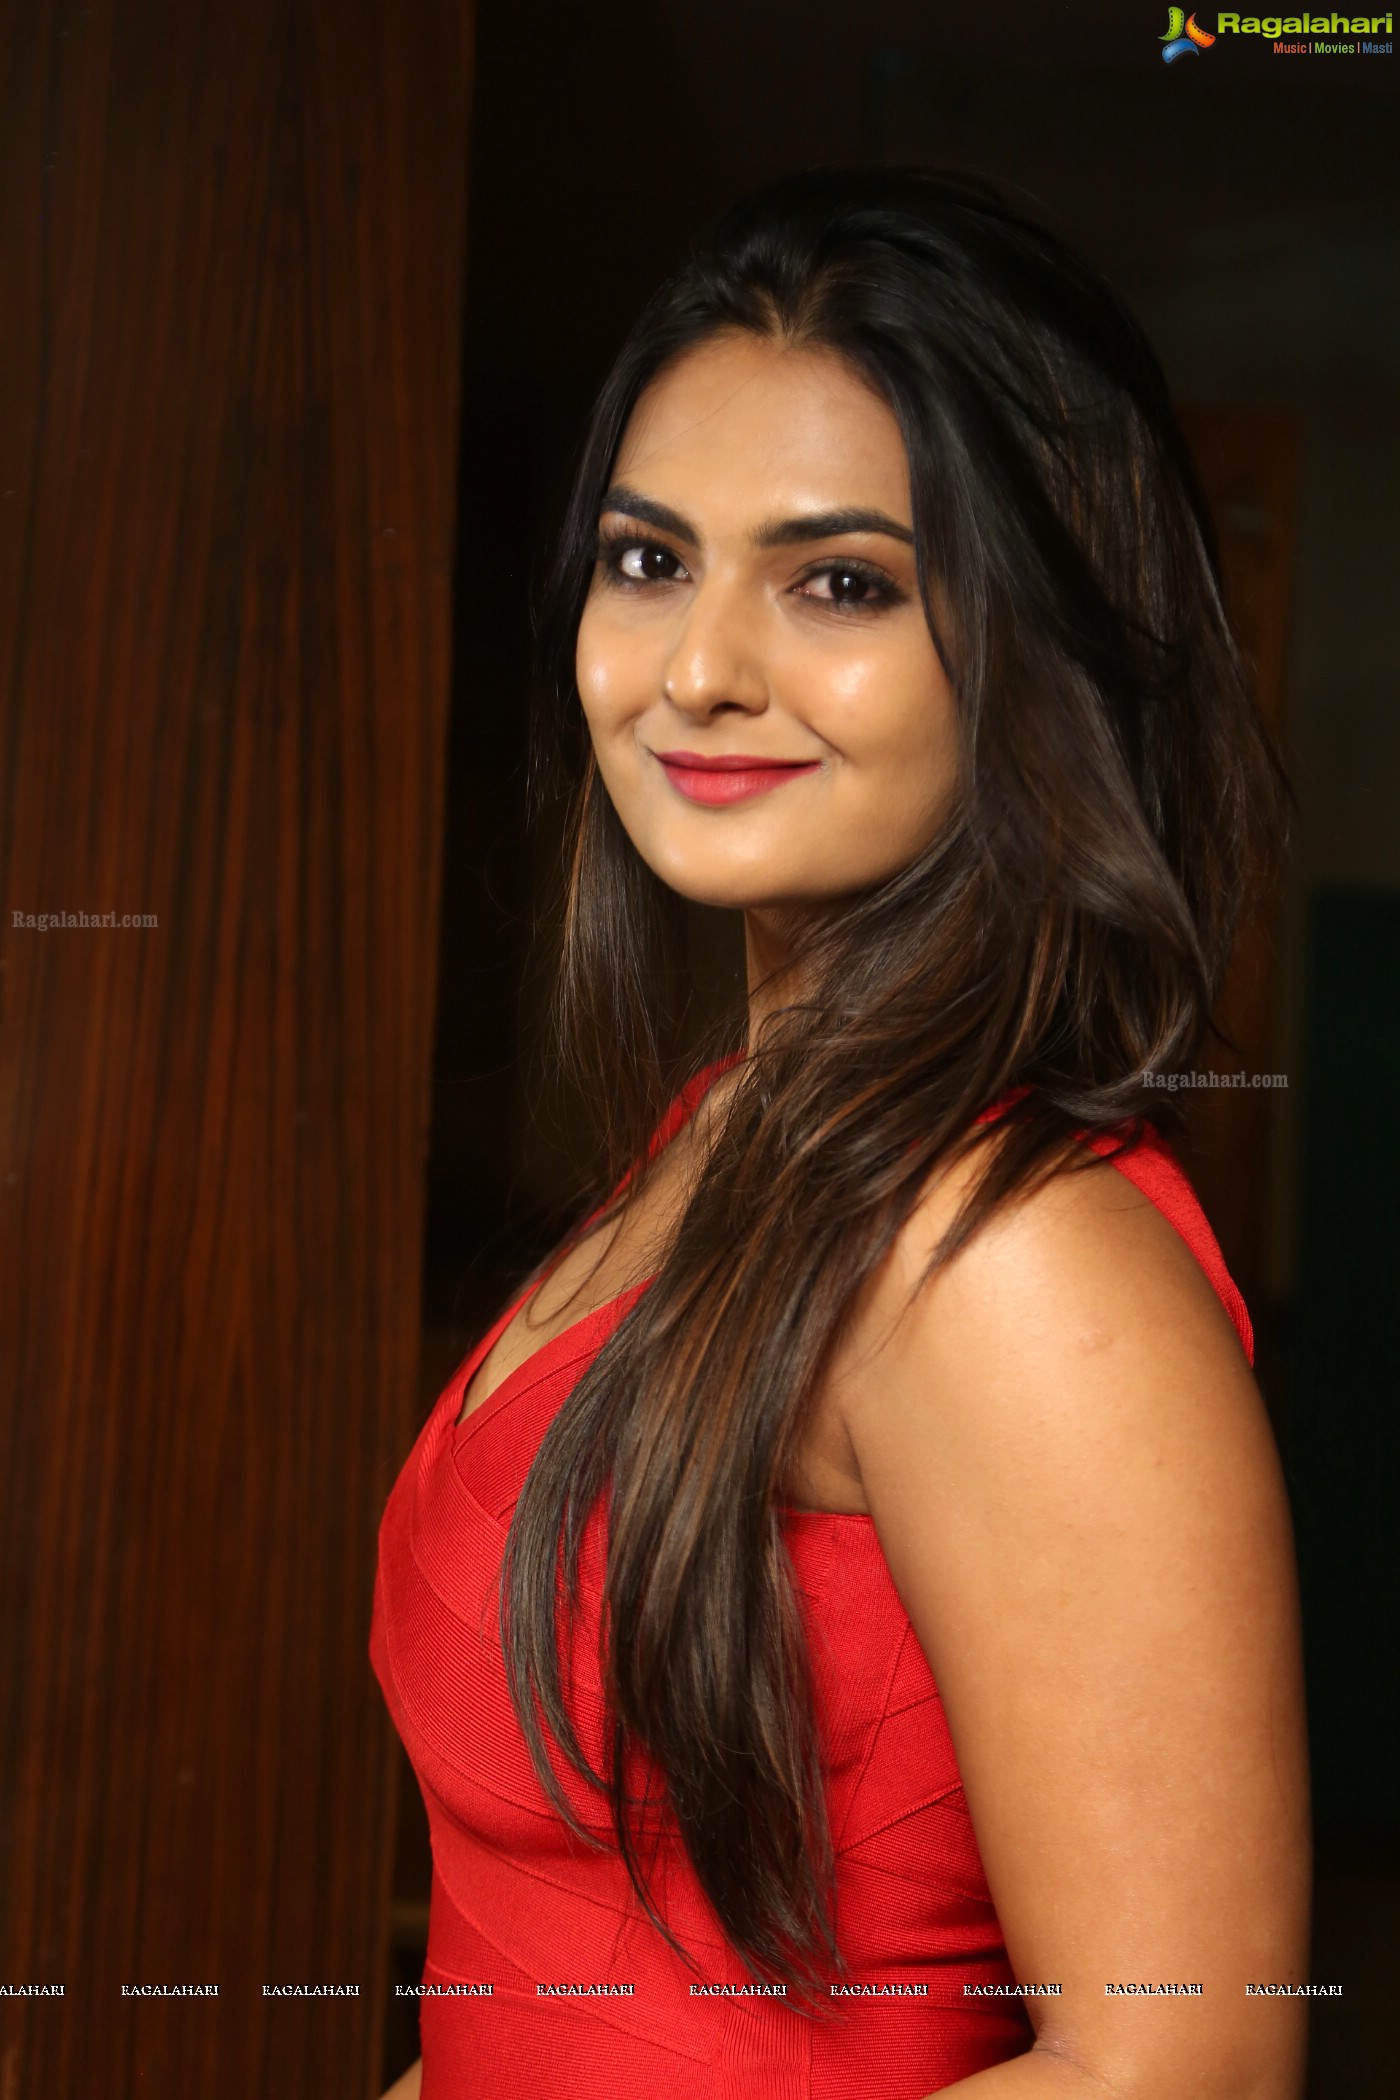 Neha Deshpande at Barbeque Nation Cake Mixing Ceremony (Posters)